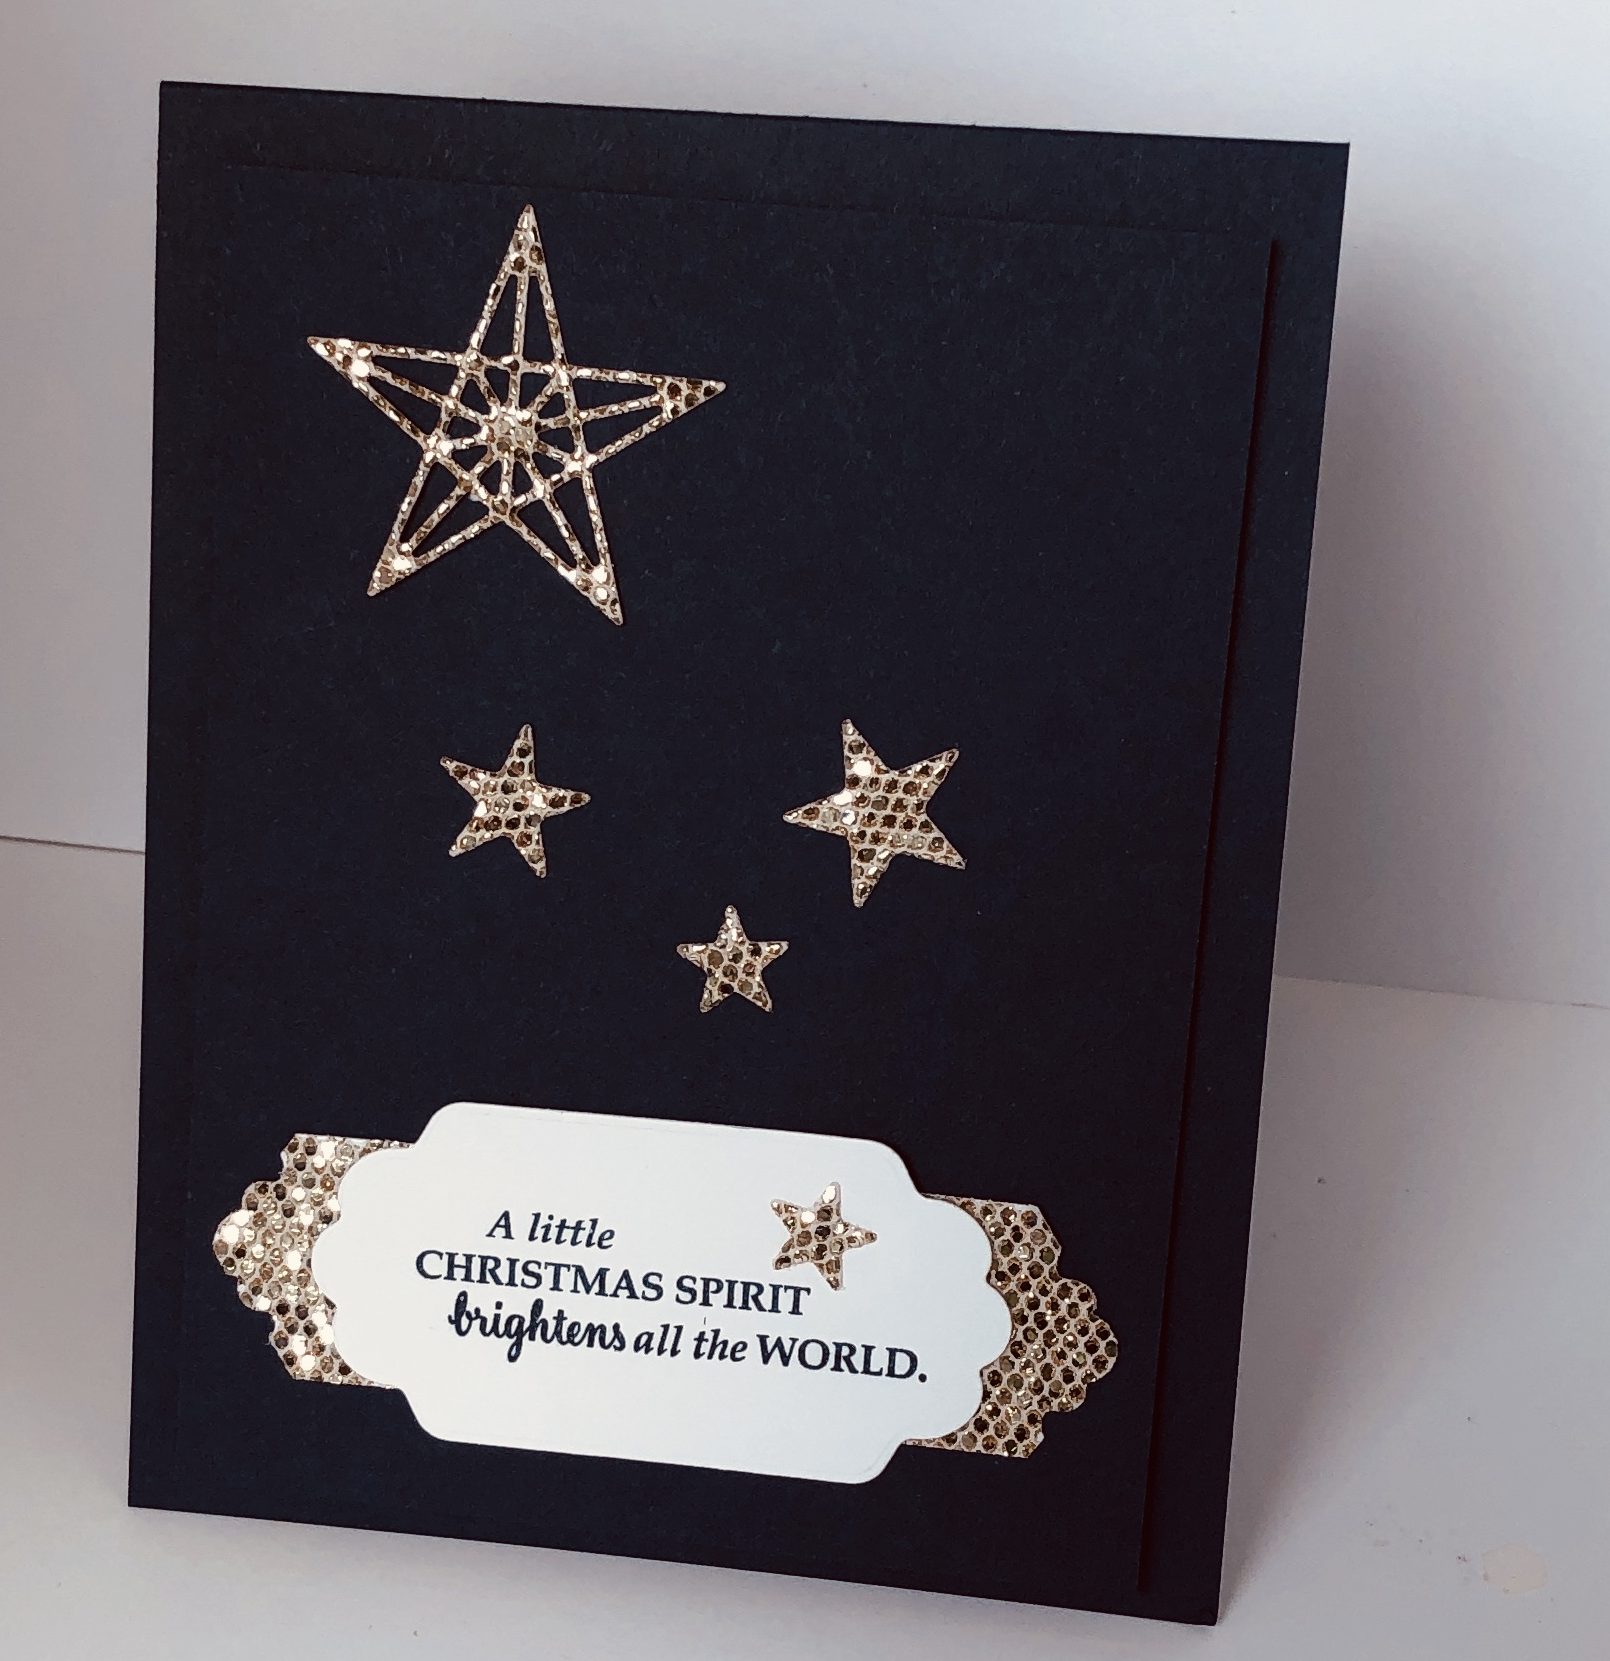 Handmade Christmas card created with the Stitched Stars Dies that went from meh to wow!